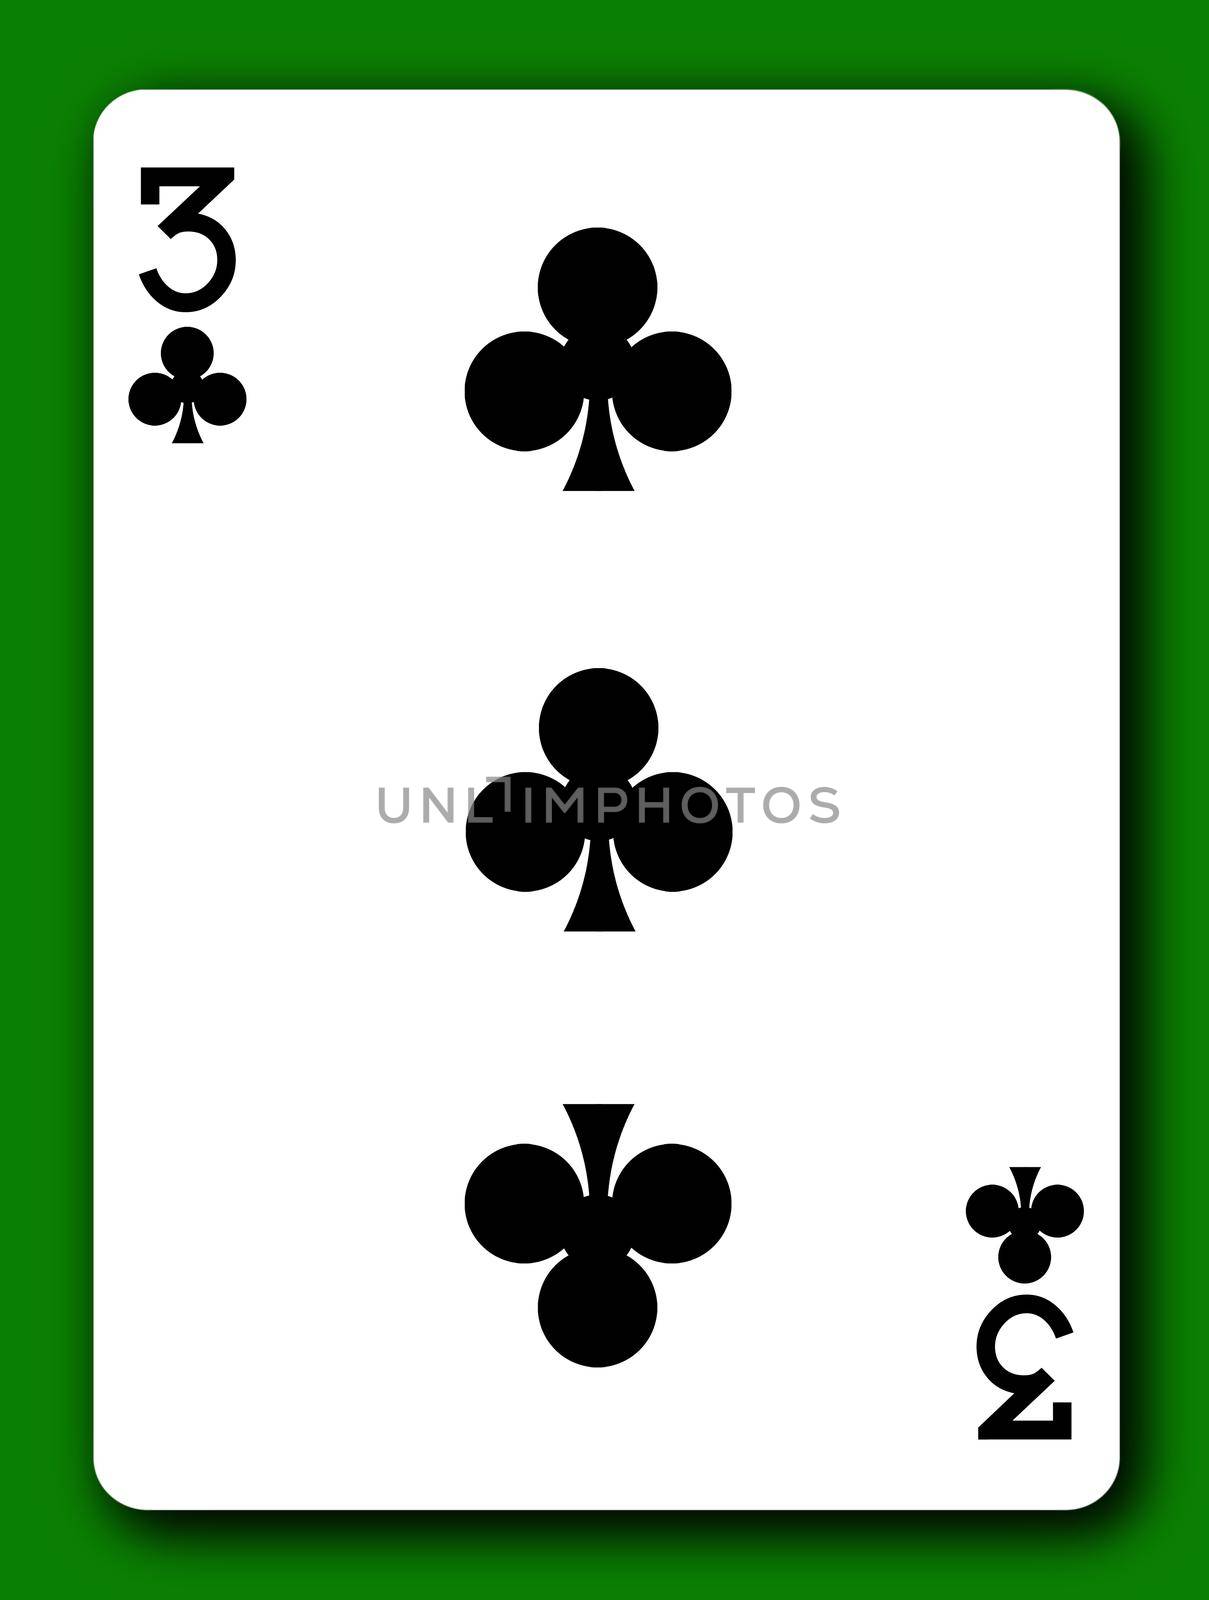 A 3 Three of Clubs playing card with clipping path to remove background and shadow 3d illustration